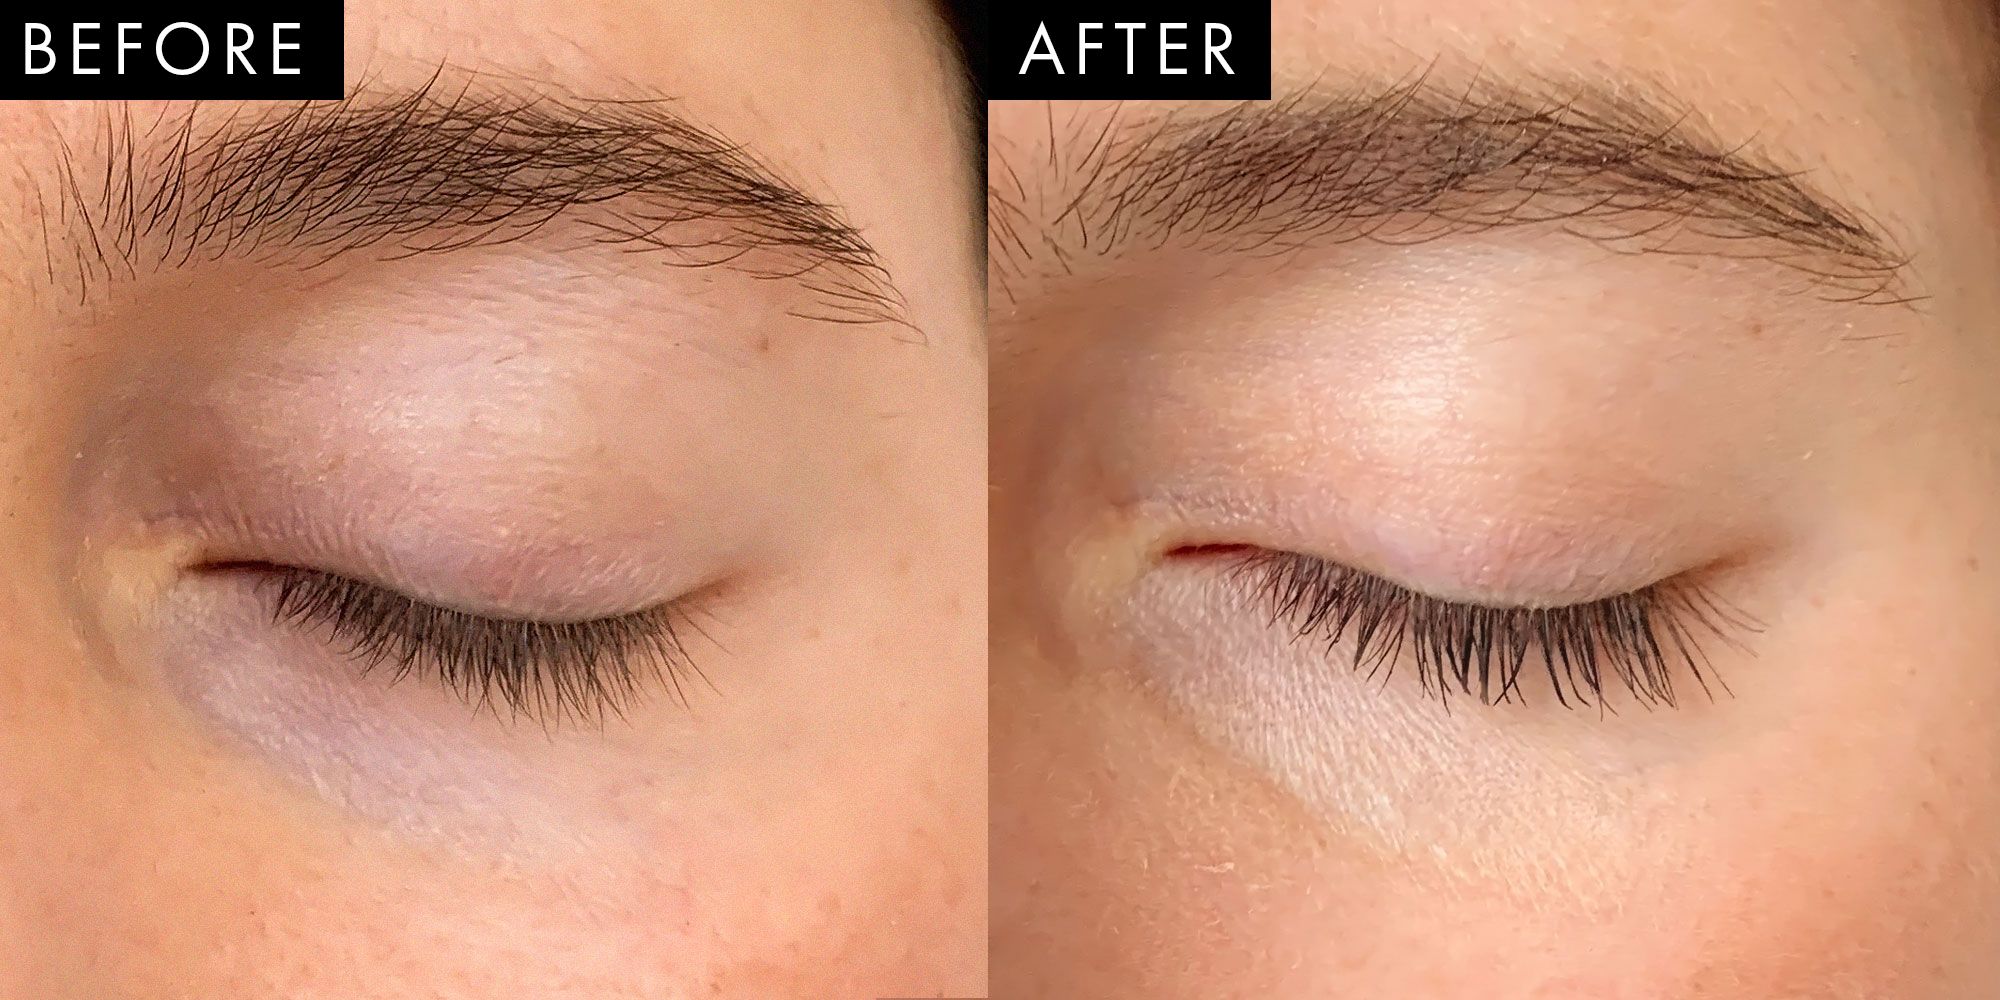 Dye Your Eyelashes Before and After: What You Need to Know